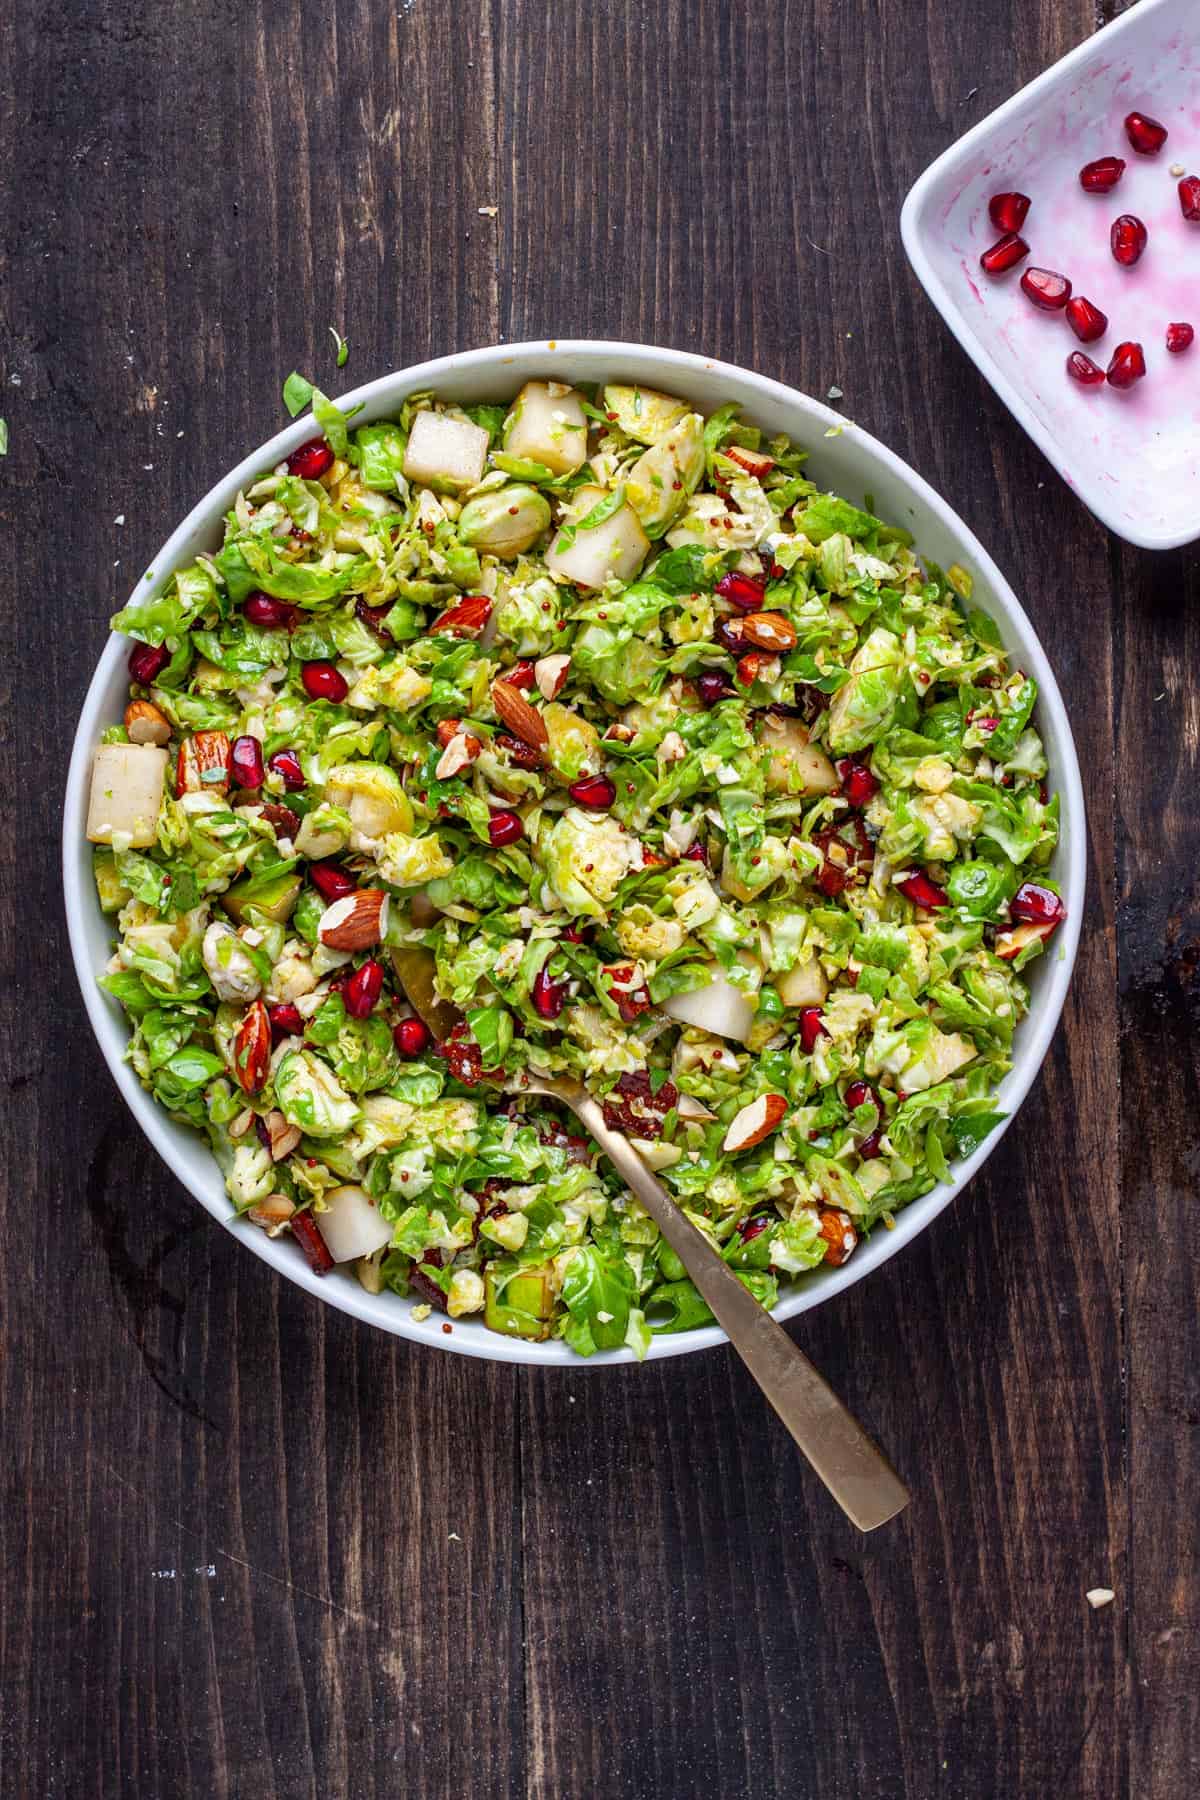 A serving platter of brussels sprouts salad with bacon and fig dressing and topped with pears and pomegranate arils.